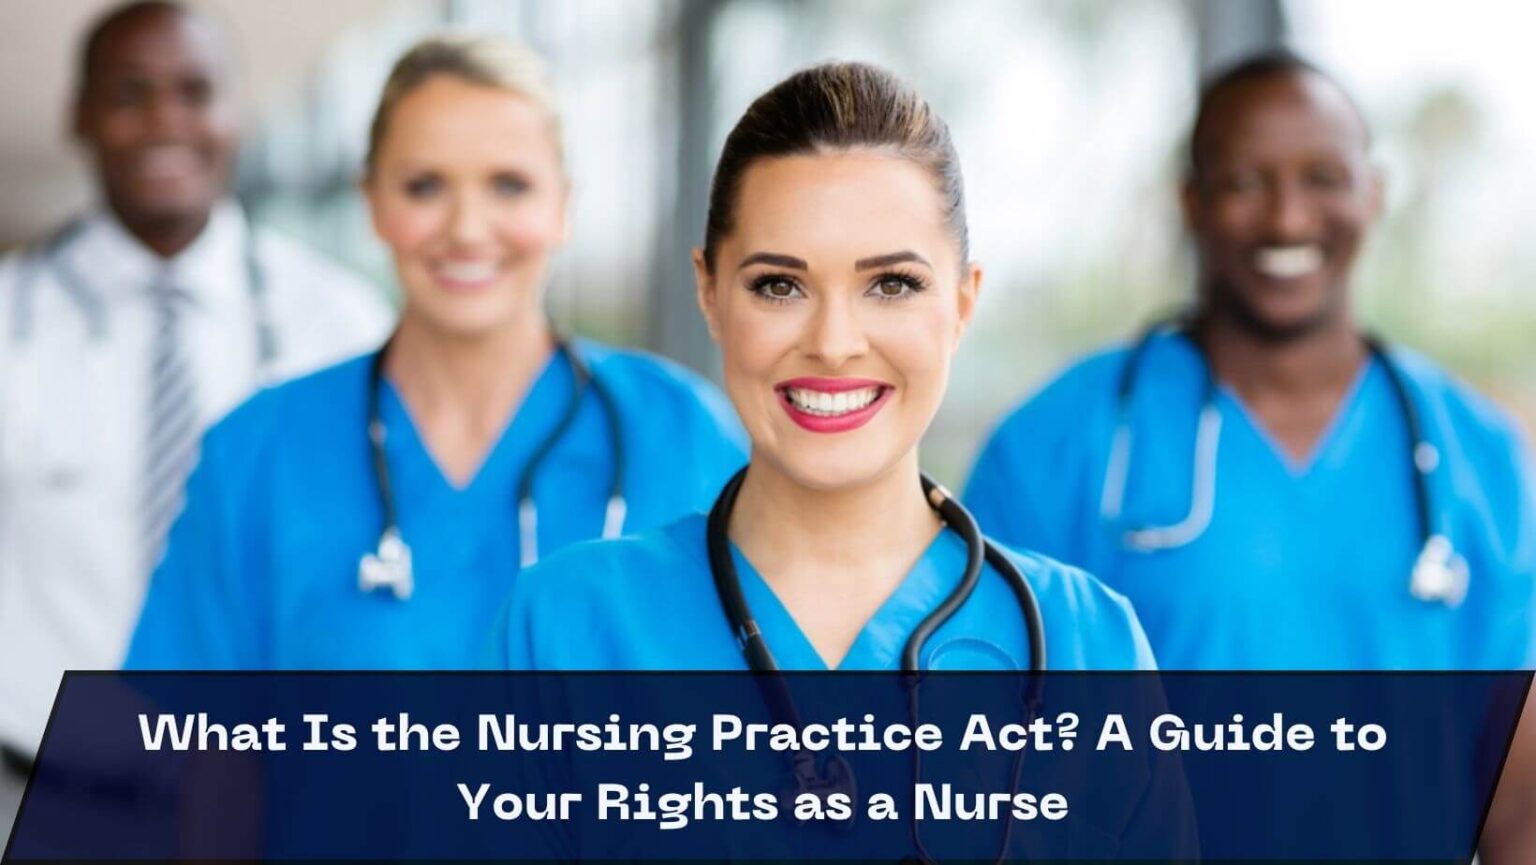 What Is the Nursing Practice Act?